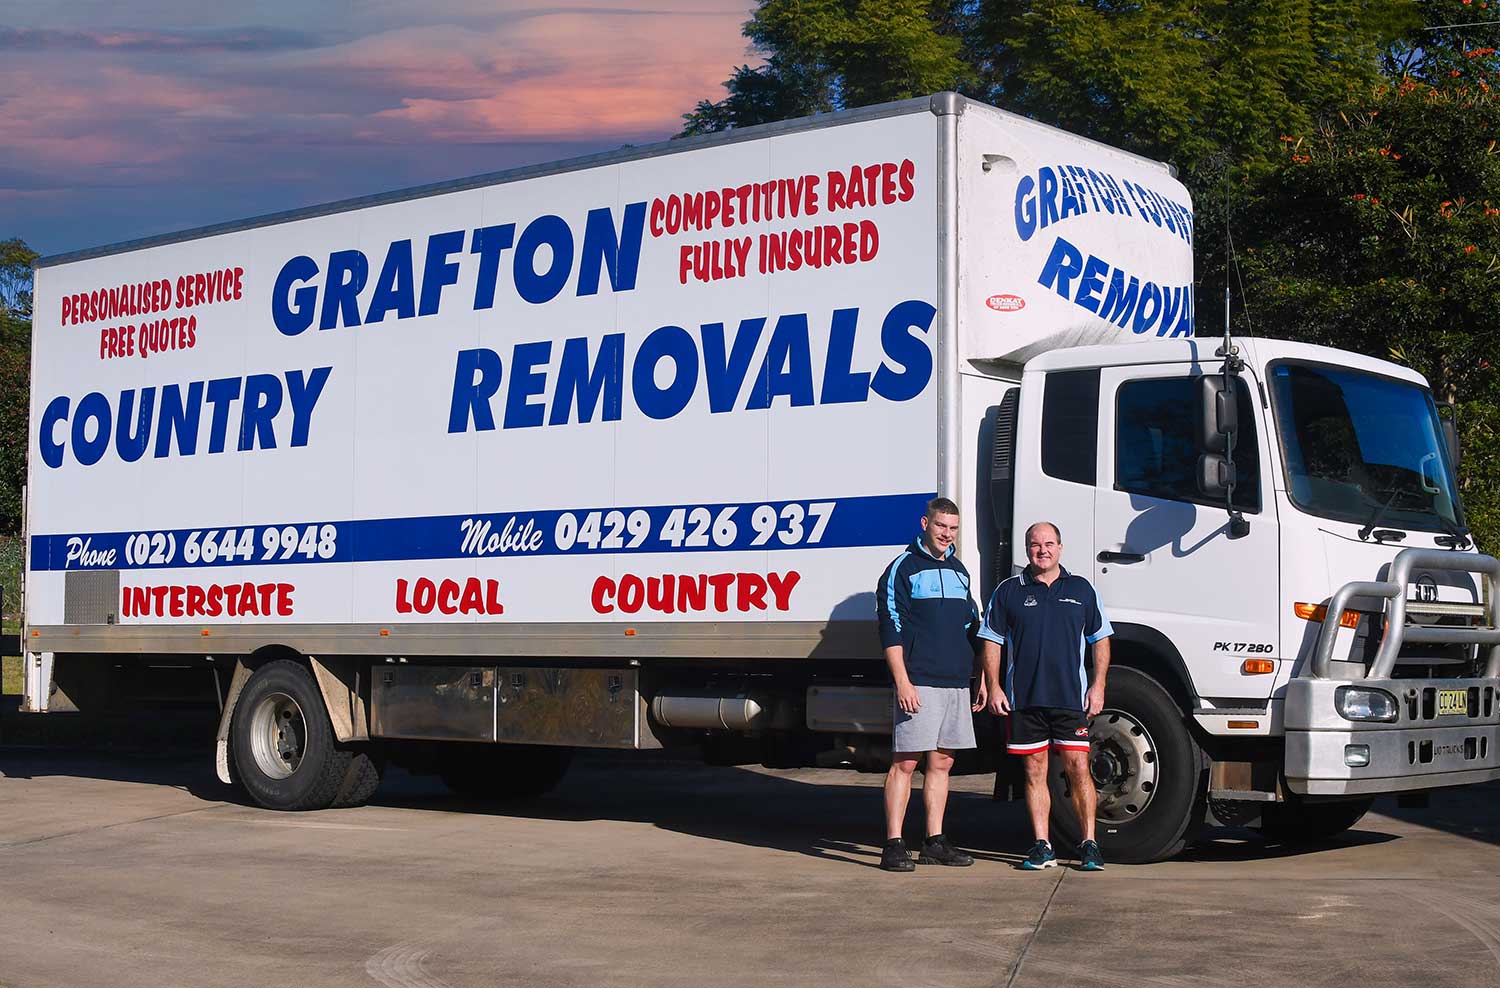 Grafton Country Removals